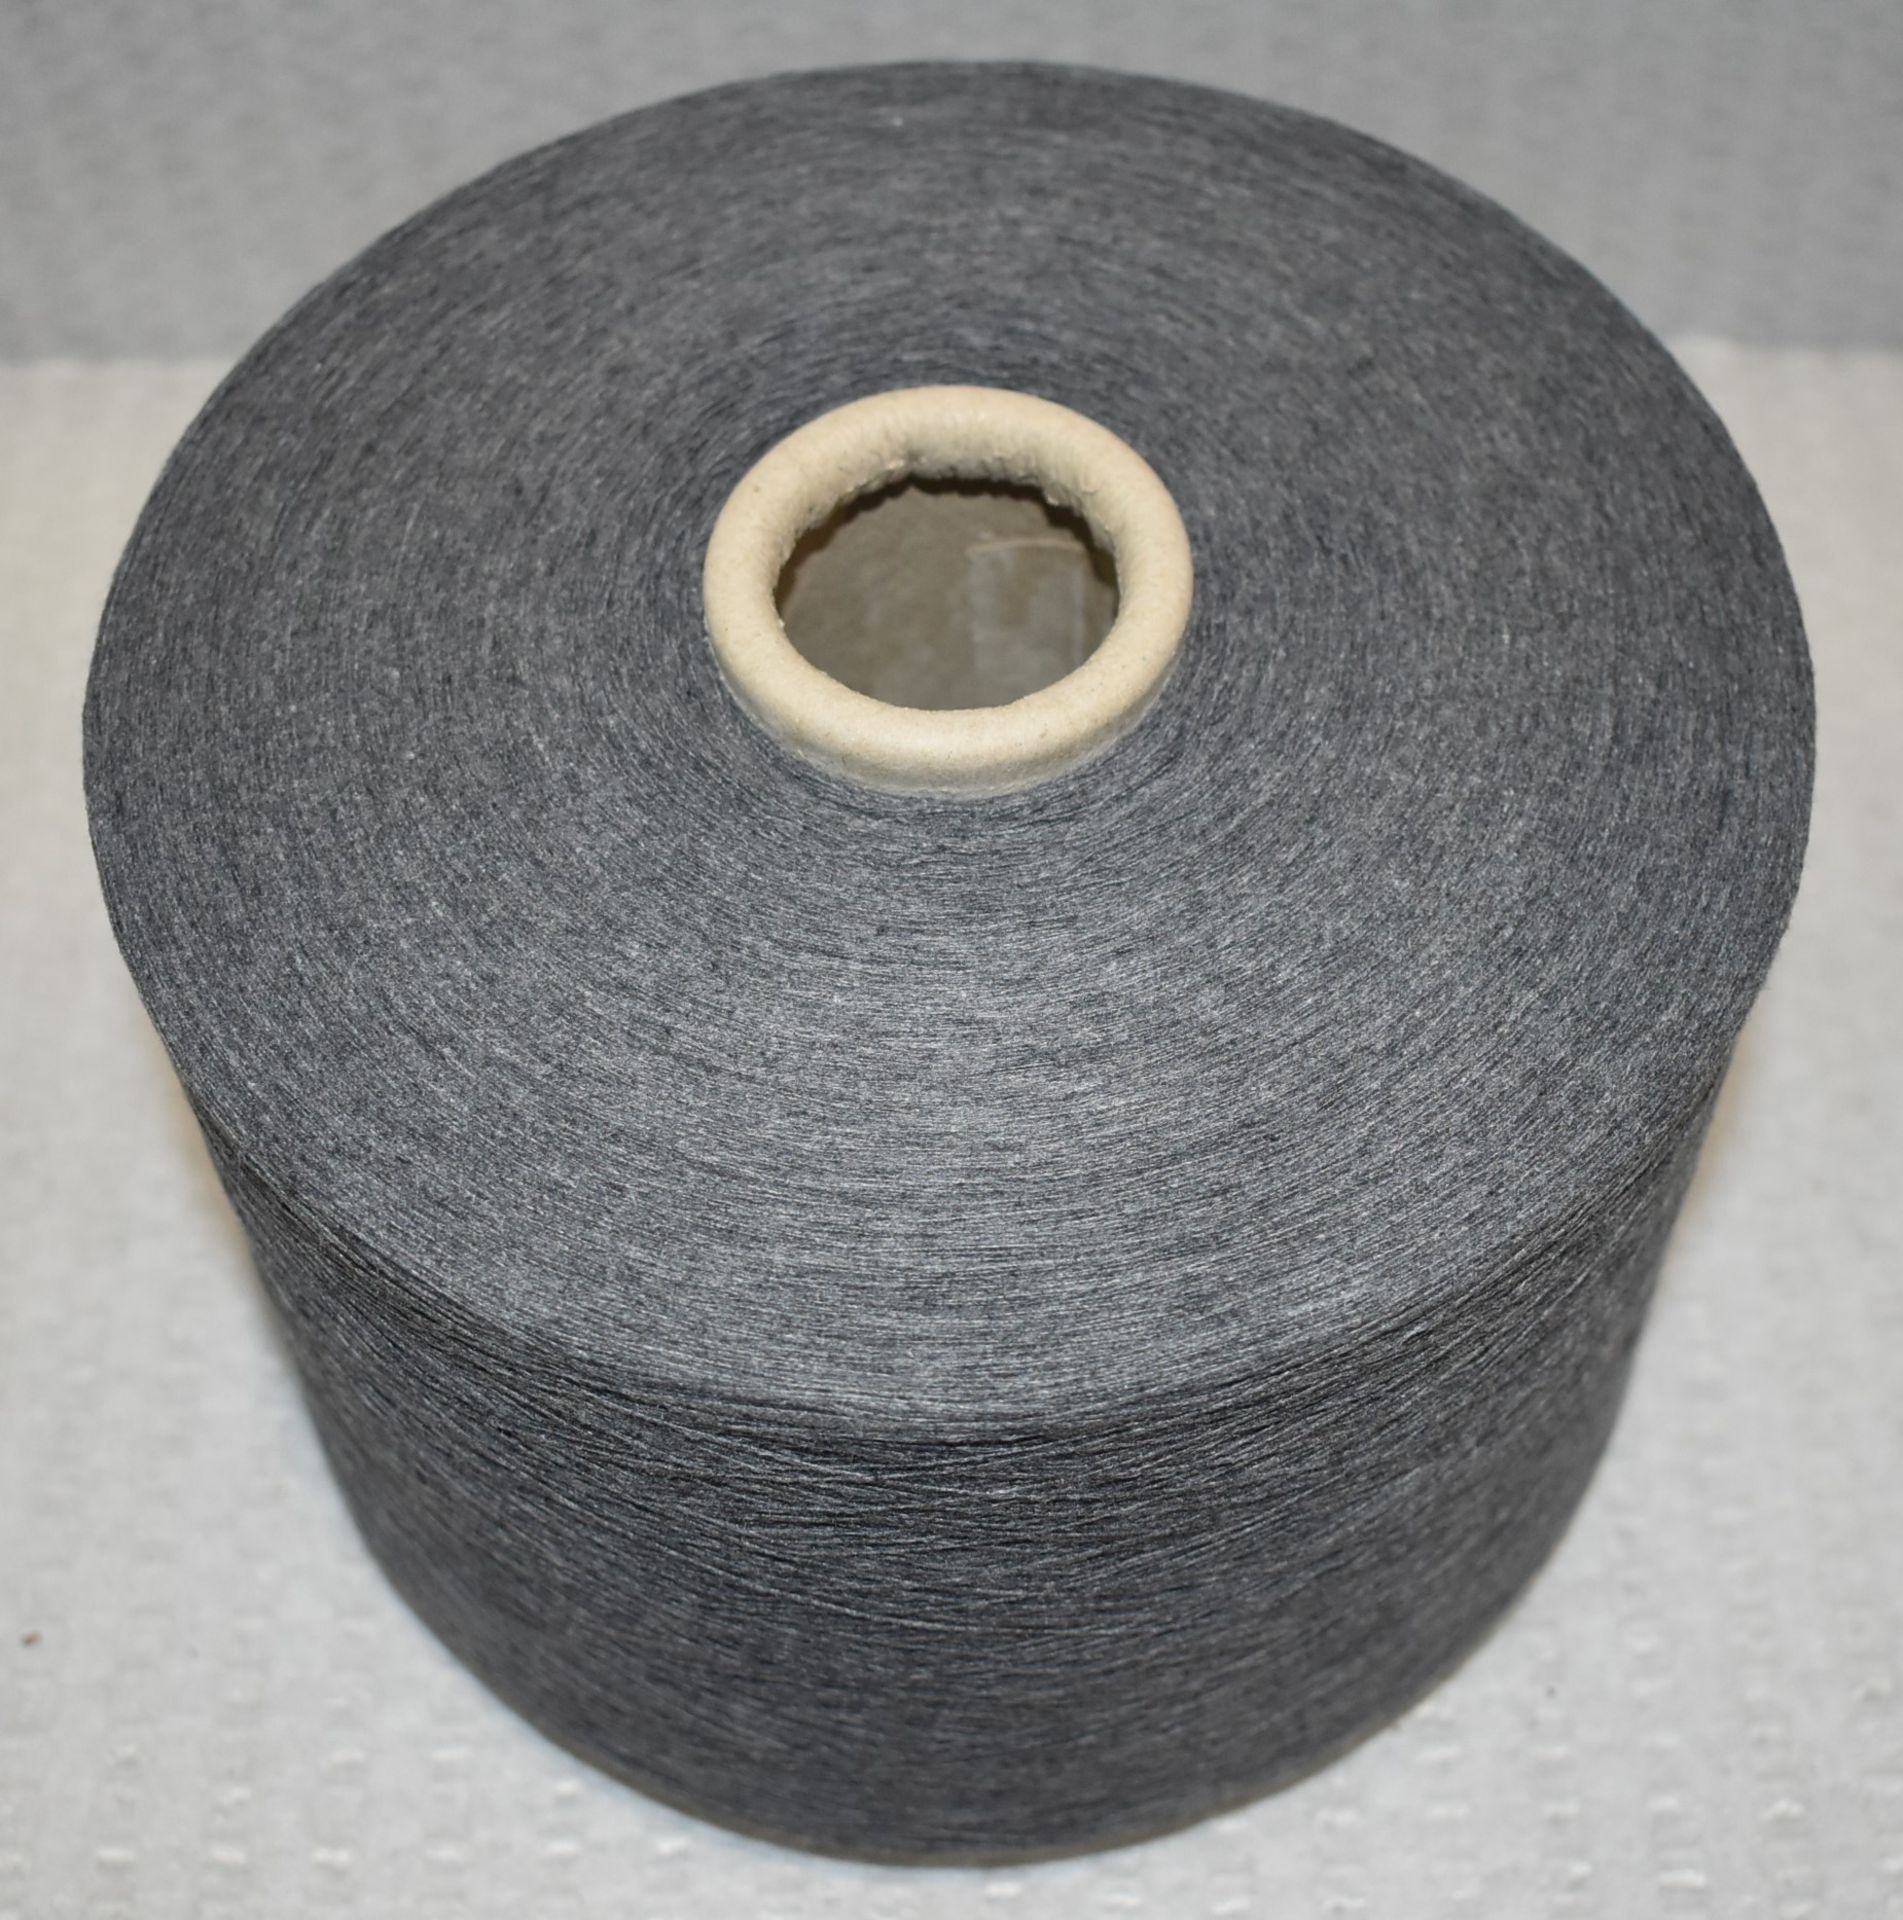 10 x Cones of 1/13 MicroCotton Knitting Yarn - Mid Grey - Approx Weight: 2,500g - New Stock ABL Yarn - Image 5 of 17